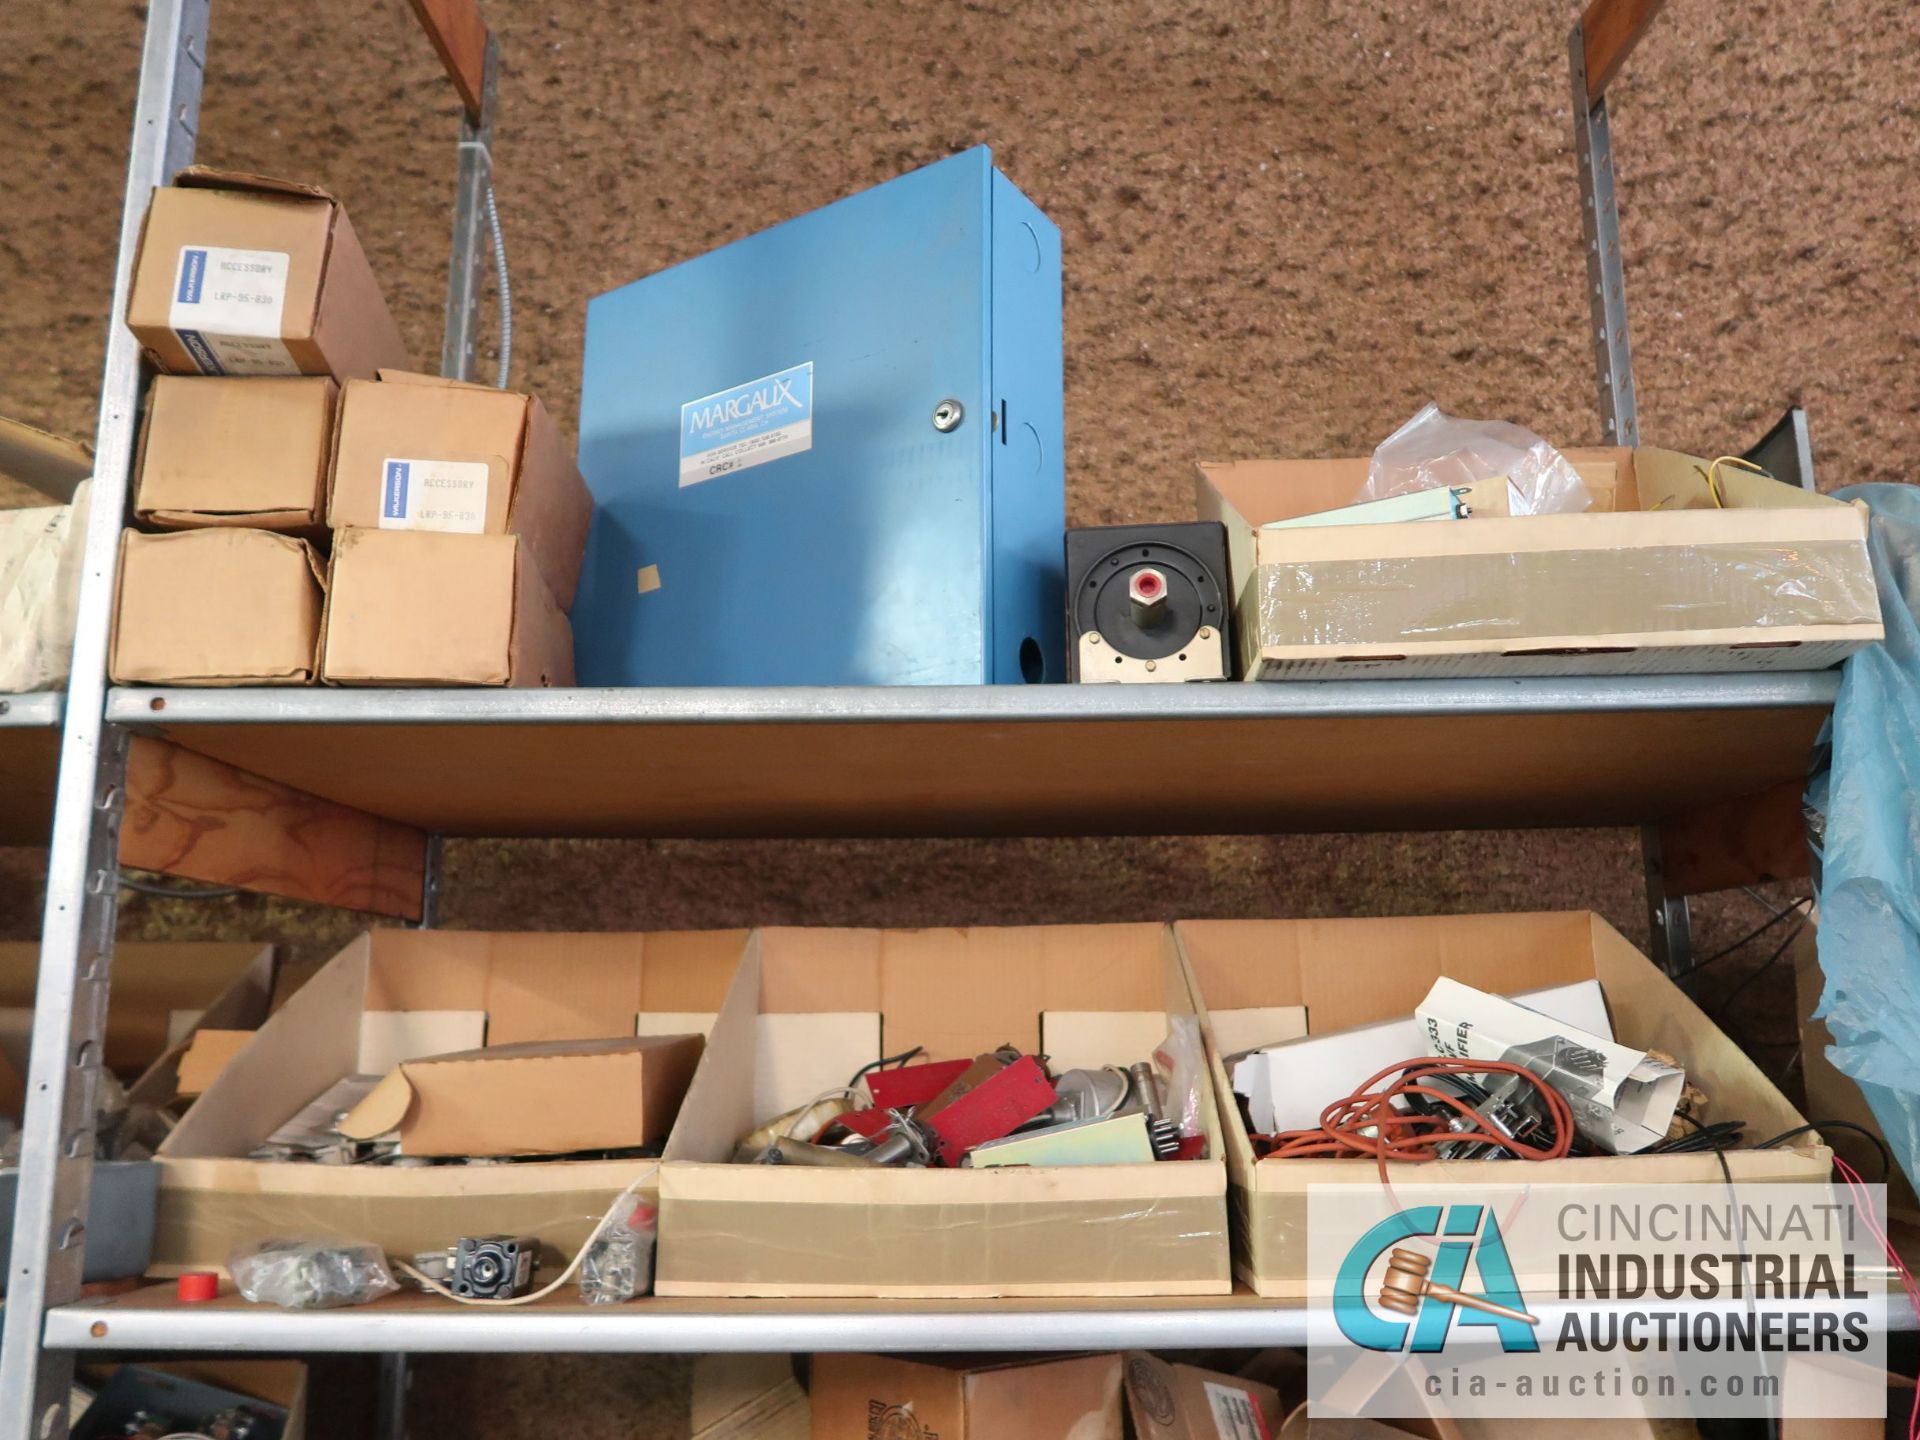 CONTENTS OF (16) SHELVES INCLUDING MISCELLANEOUS VALVES, THERMOSTATS, ANALYZERS, ELECTRICAL, CONTROL - Image 26 of 47